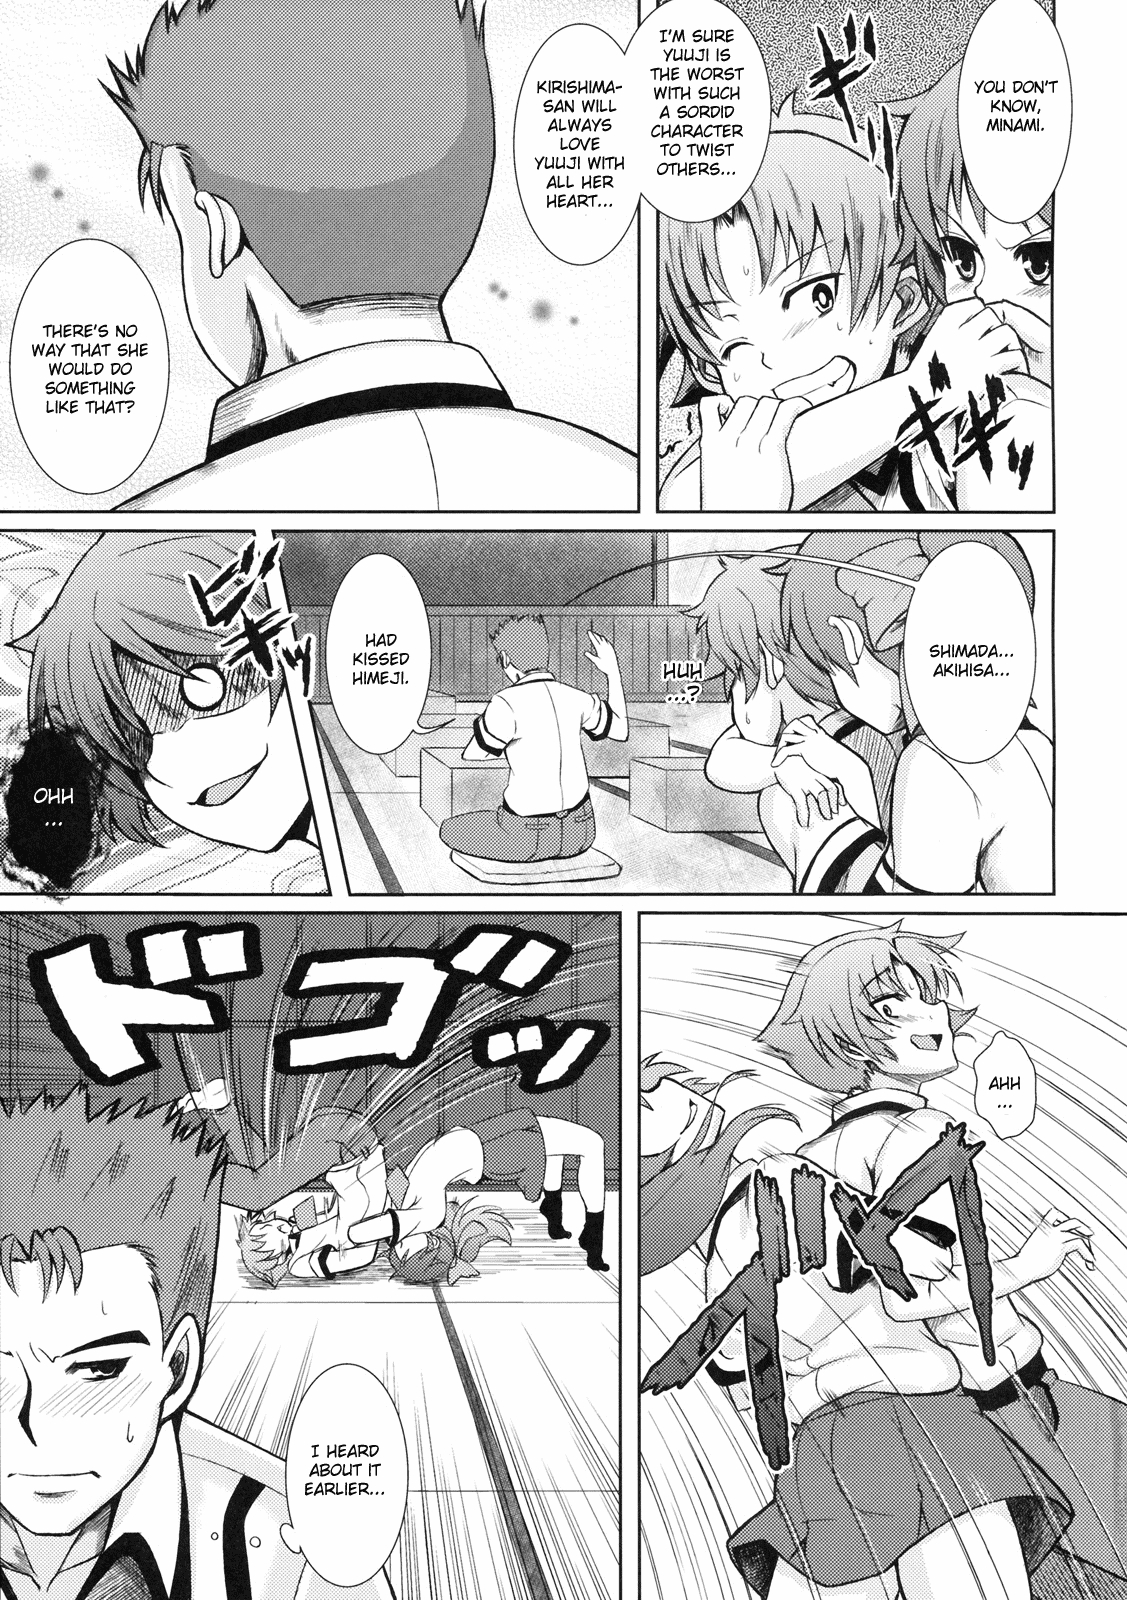 (COMIC1☆4) [PTD (Tatsuhiko)] Iron finger from hell (Baka to Test to Shoukanju) [English] [One of a Kind Productions] 3